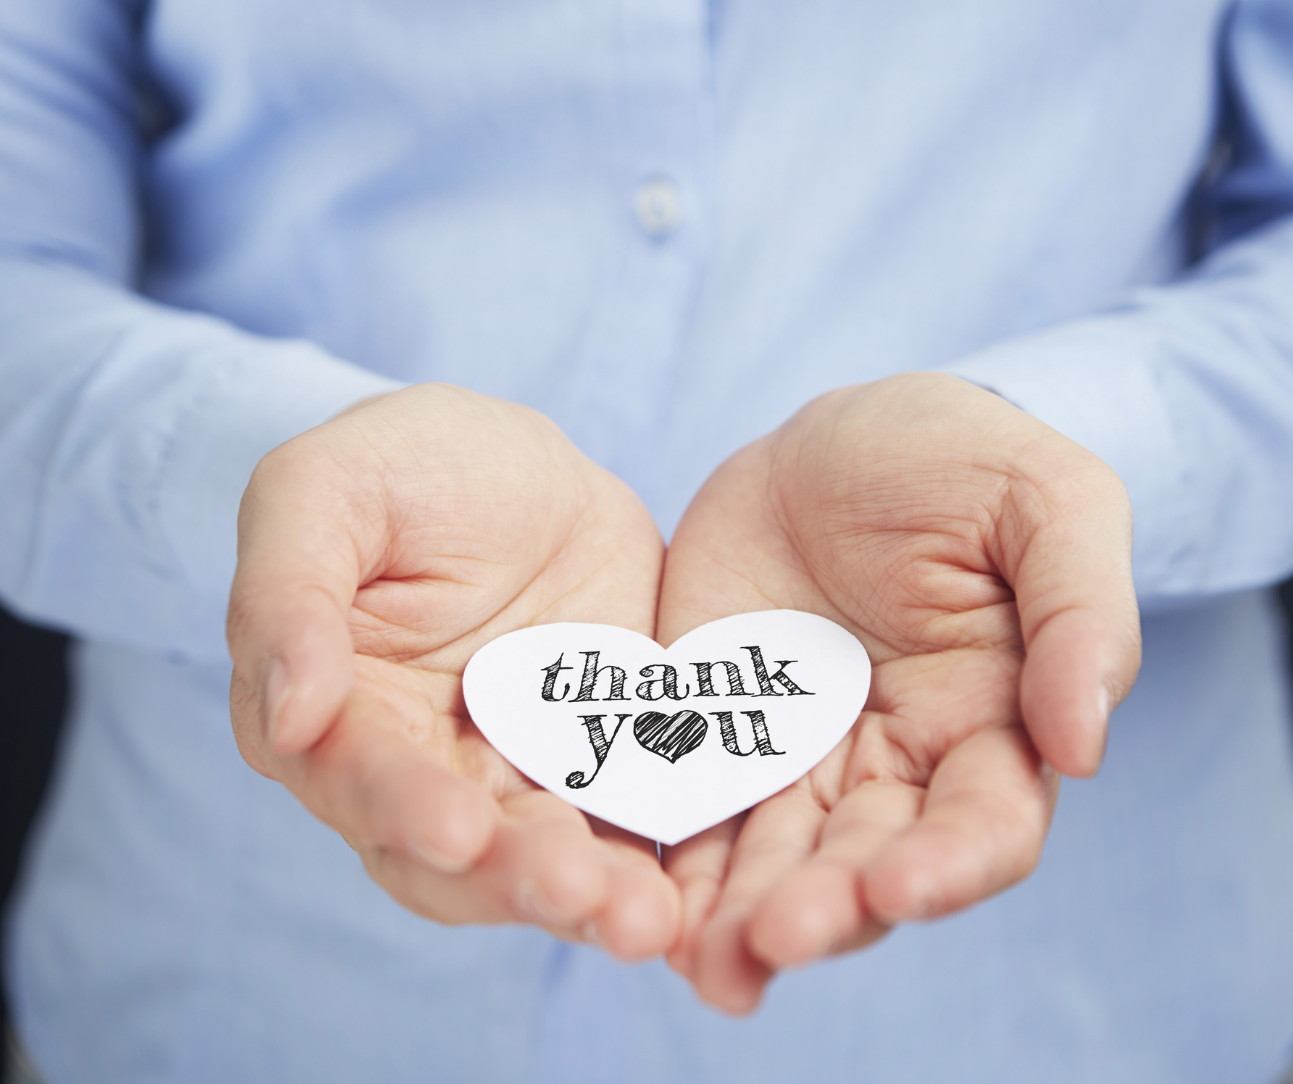 Women wearing light blue long-sleeved shirt holds palms out with a white heart-shaped note bearing the words 'thank you'